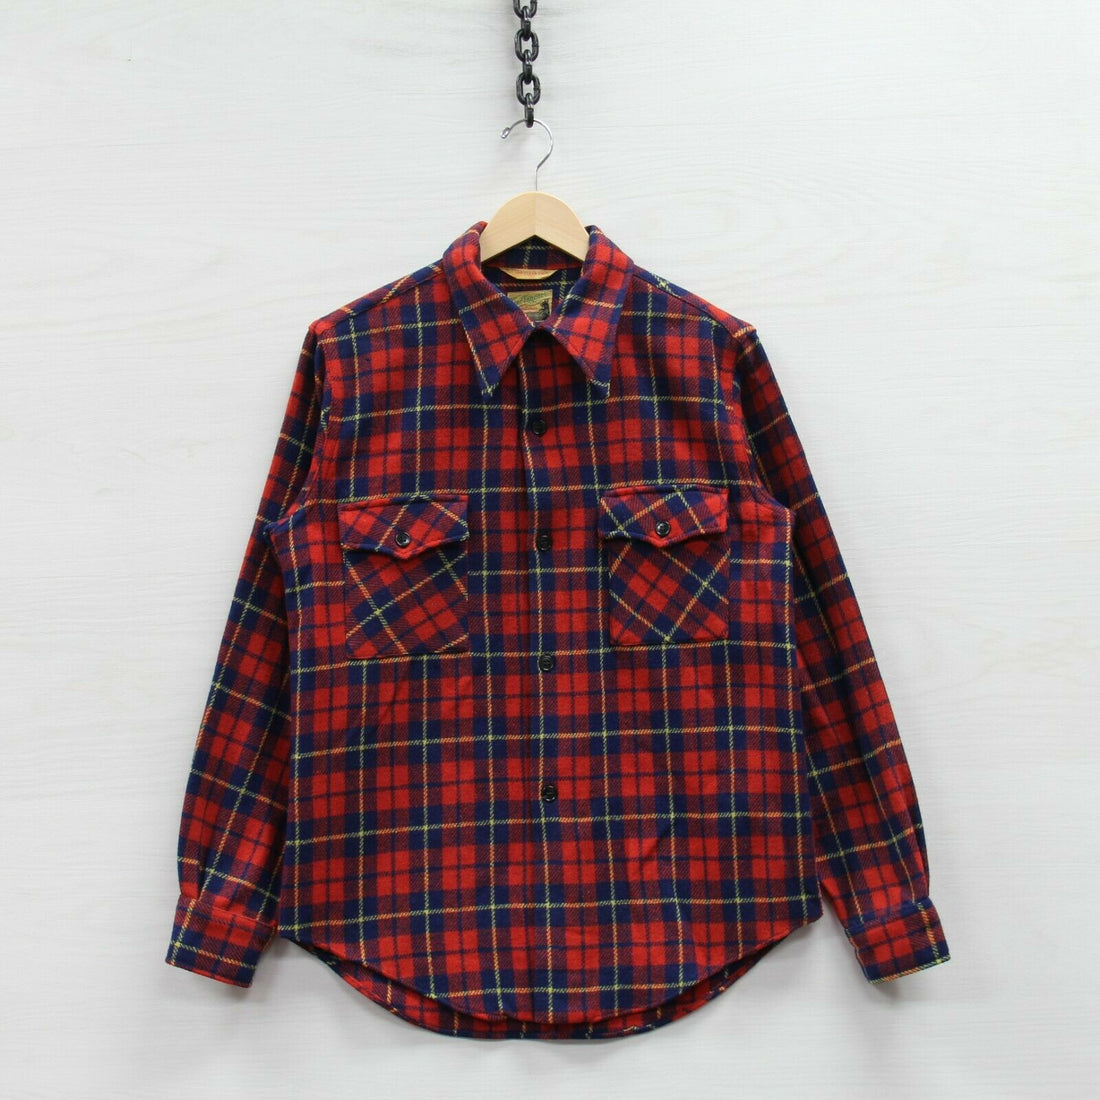 Vintage Mac Taggart Wool Button Up Shirt Size 2 Plaid Long Sleeve